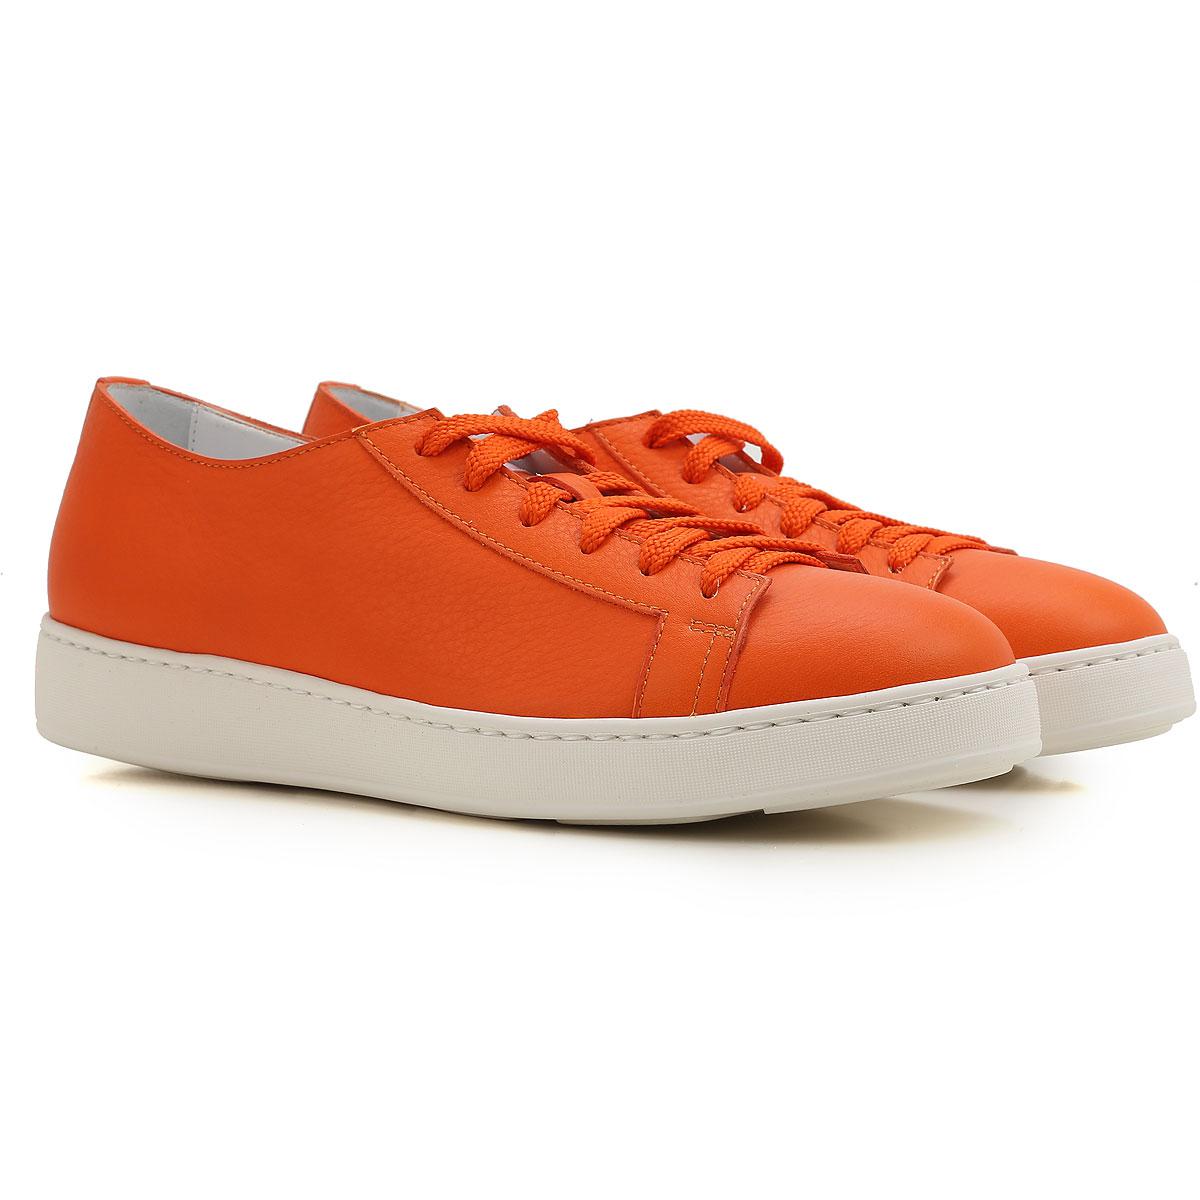 Santoni Leather Sneakers For Women On Sale In Outlet in Orange - Save ...